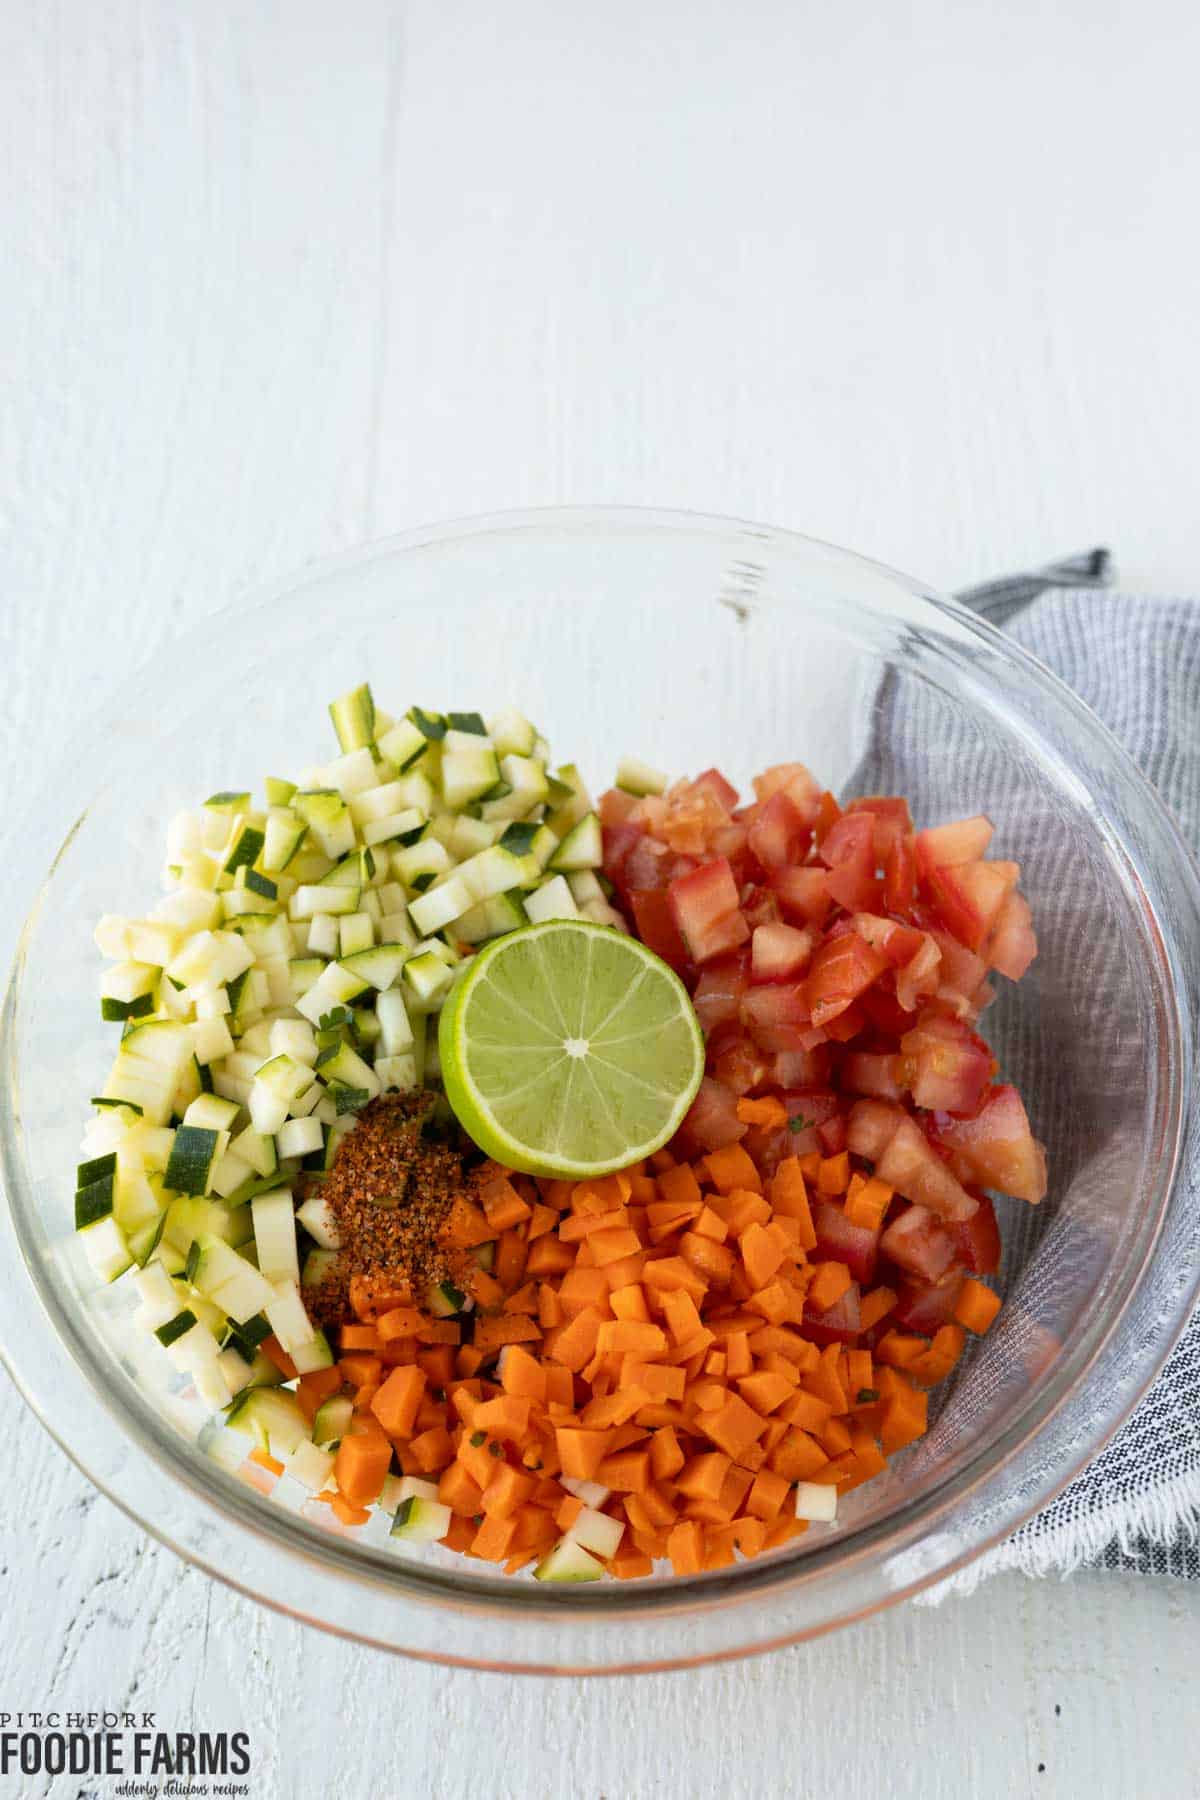 A bowl with diced zucchini, carrots, tomatoes, and half of a lime.